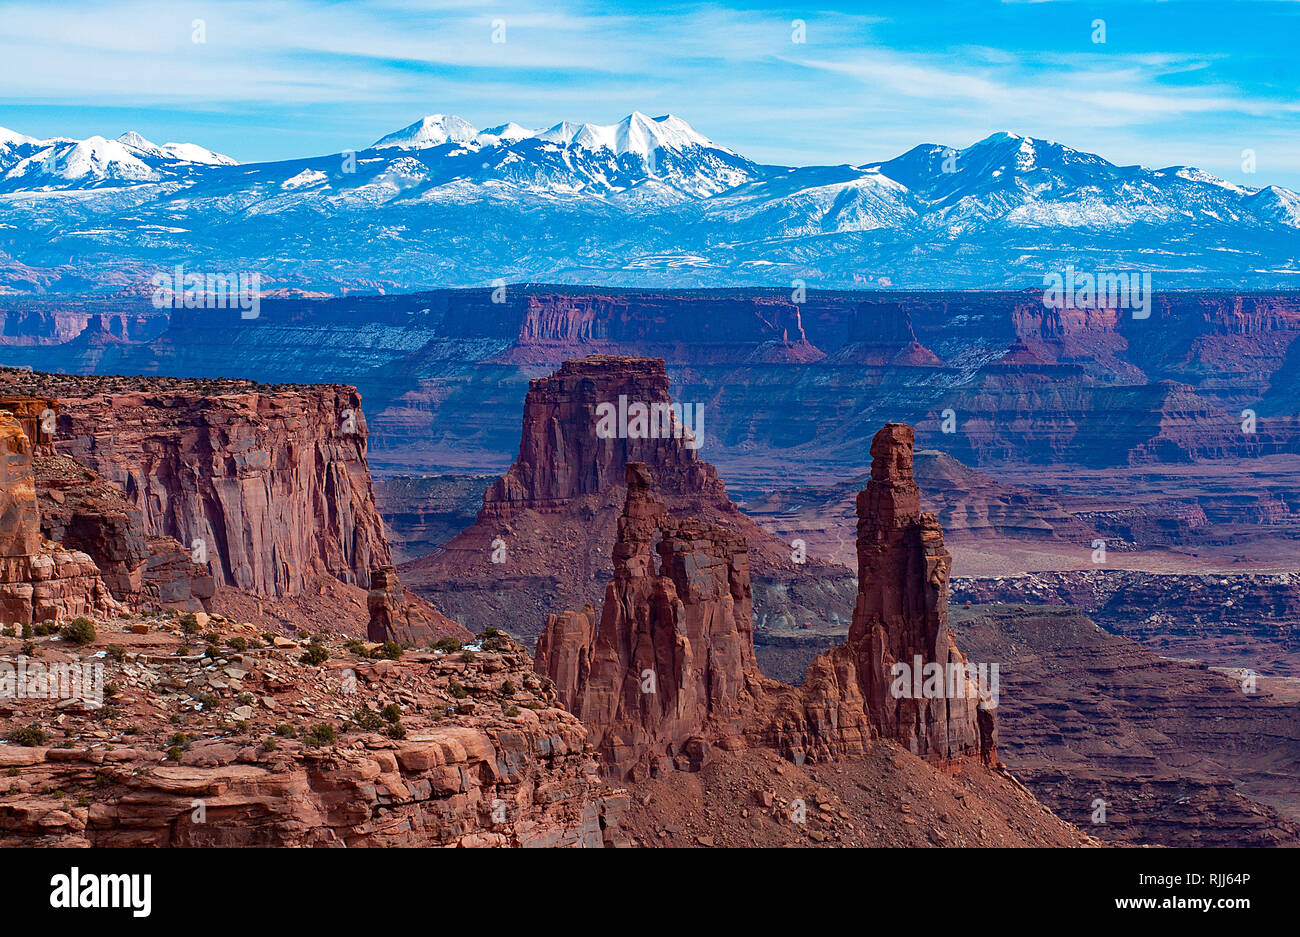 January 2019: The red sandstone canyon walls of Island in the Sky lead toward the snow capped peaks of the La Sal Mountain Range, Canyonlands NP. Stock Photo